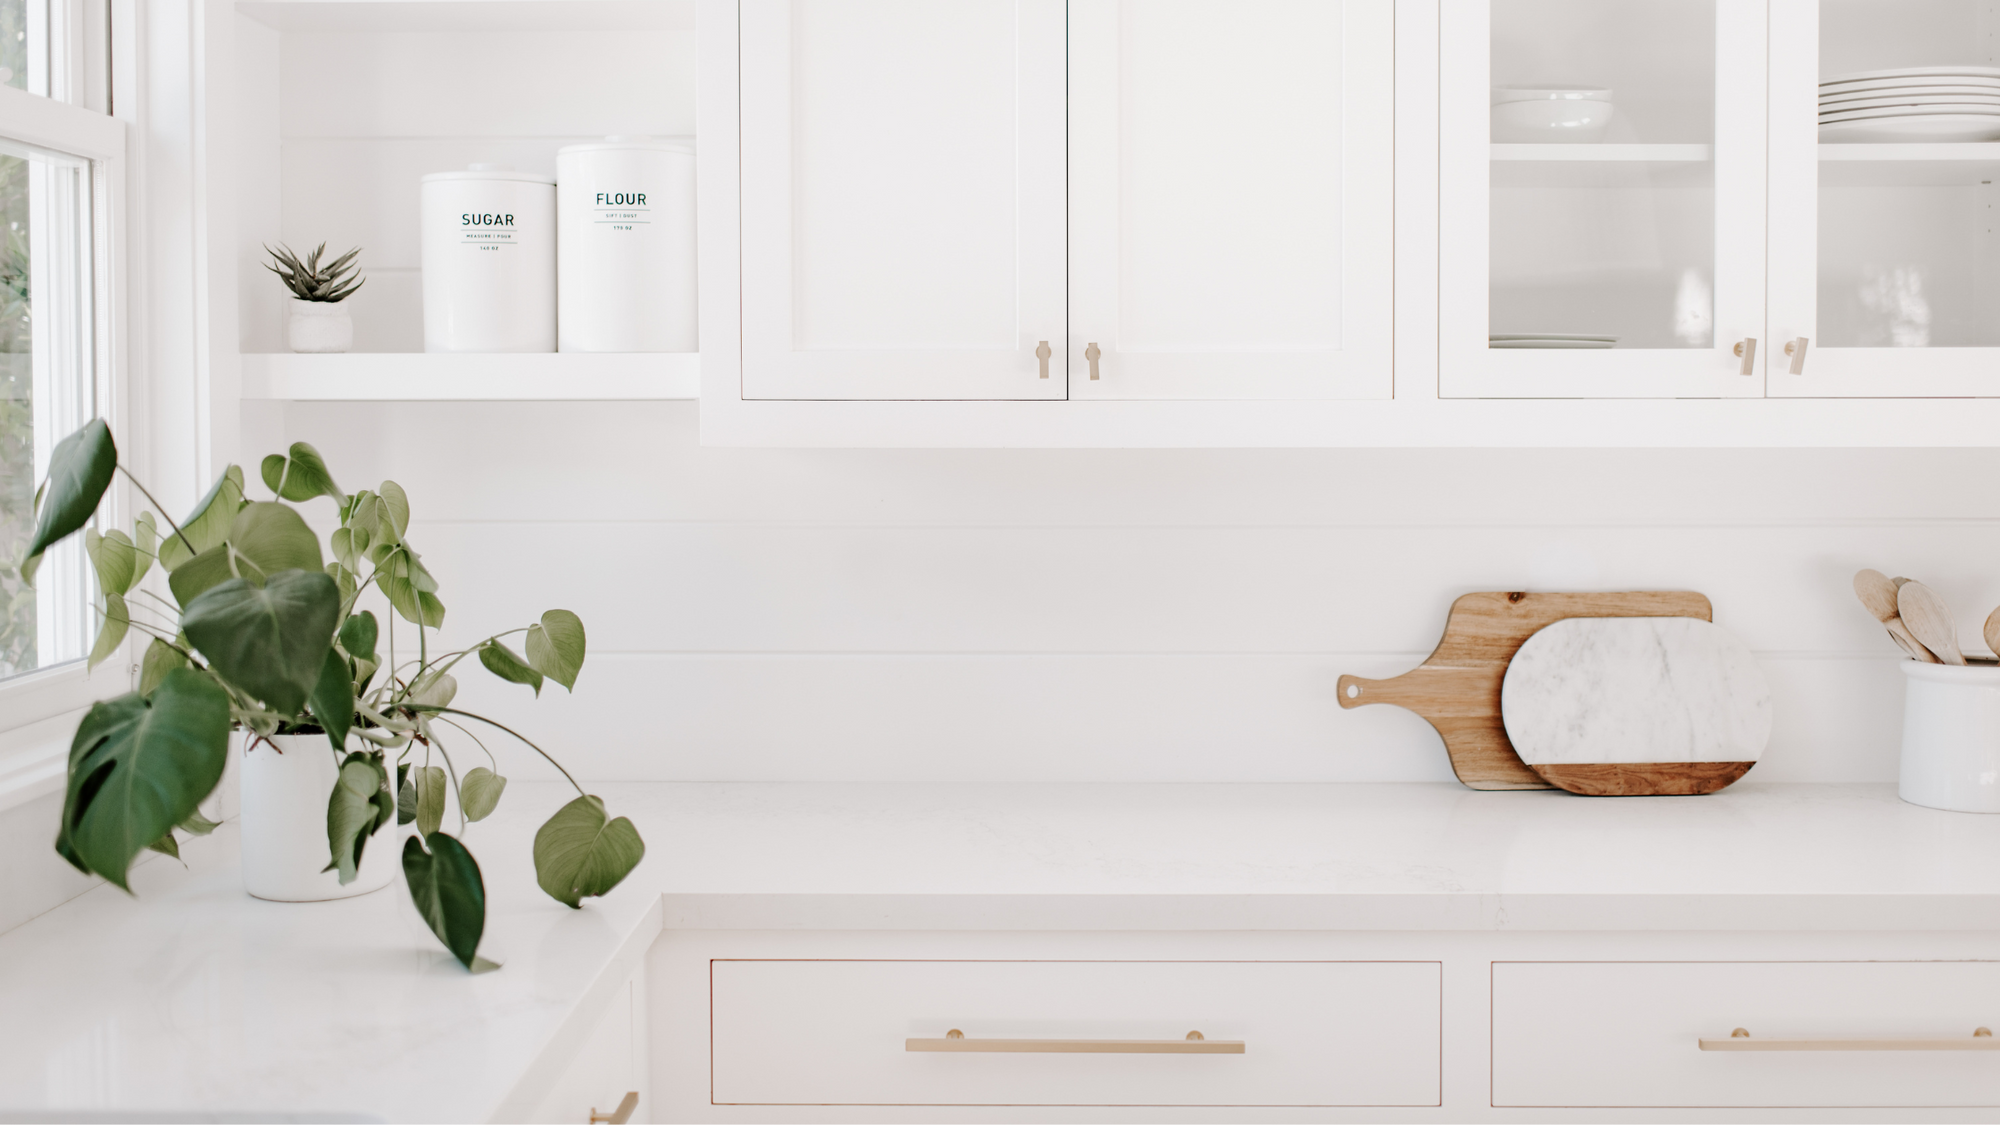 6 Must-Have Cleaning Products for the Kitchen